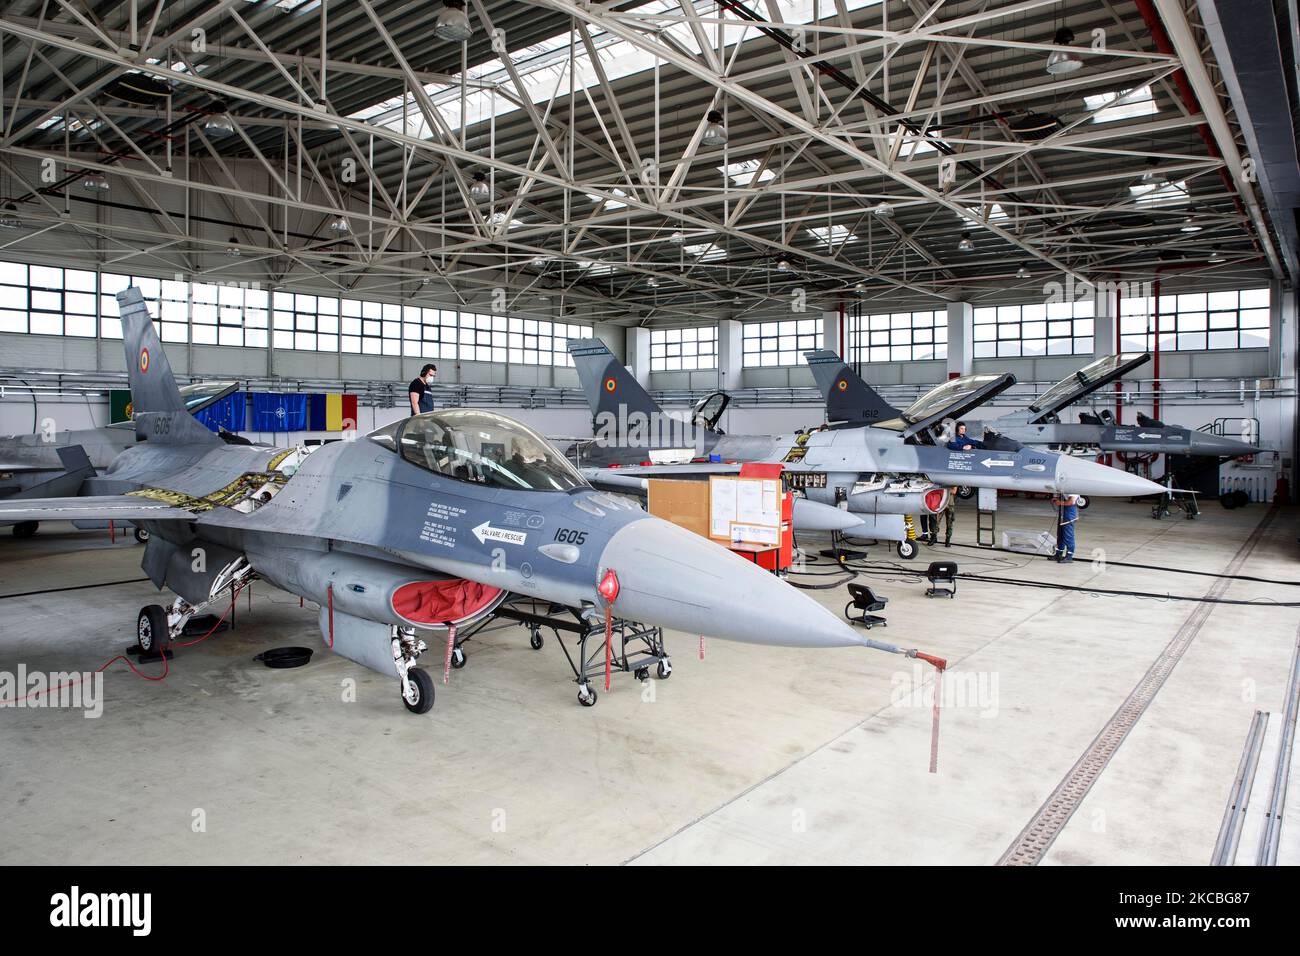 Romanian Air Force F-16's inside the maintenance hangar at an airbase in Romania. Stock Photo